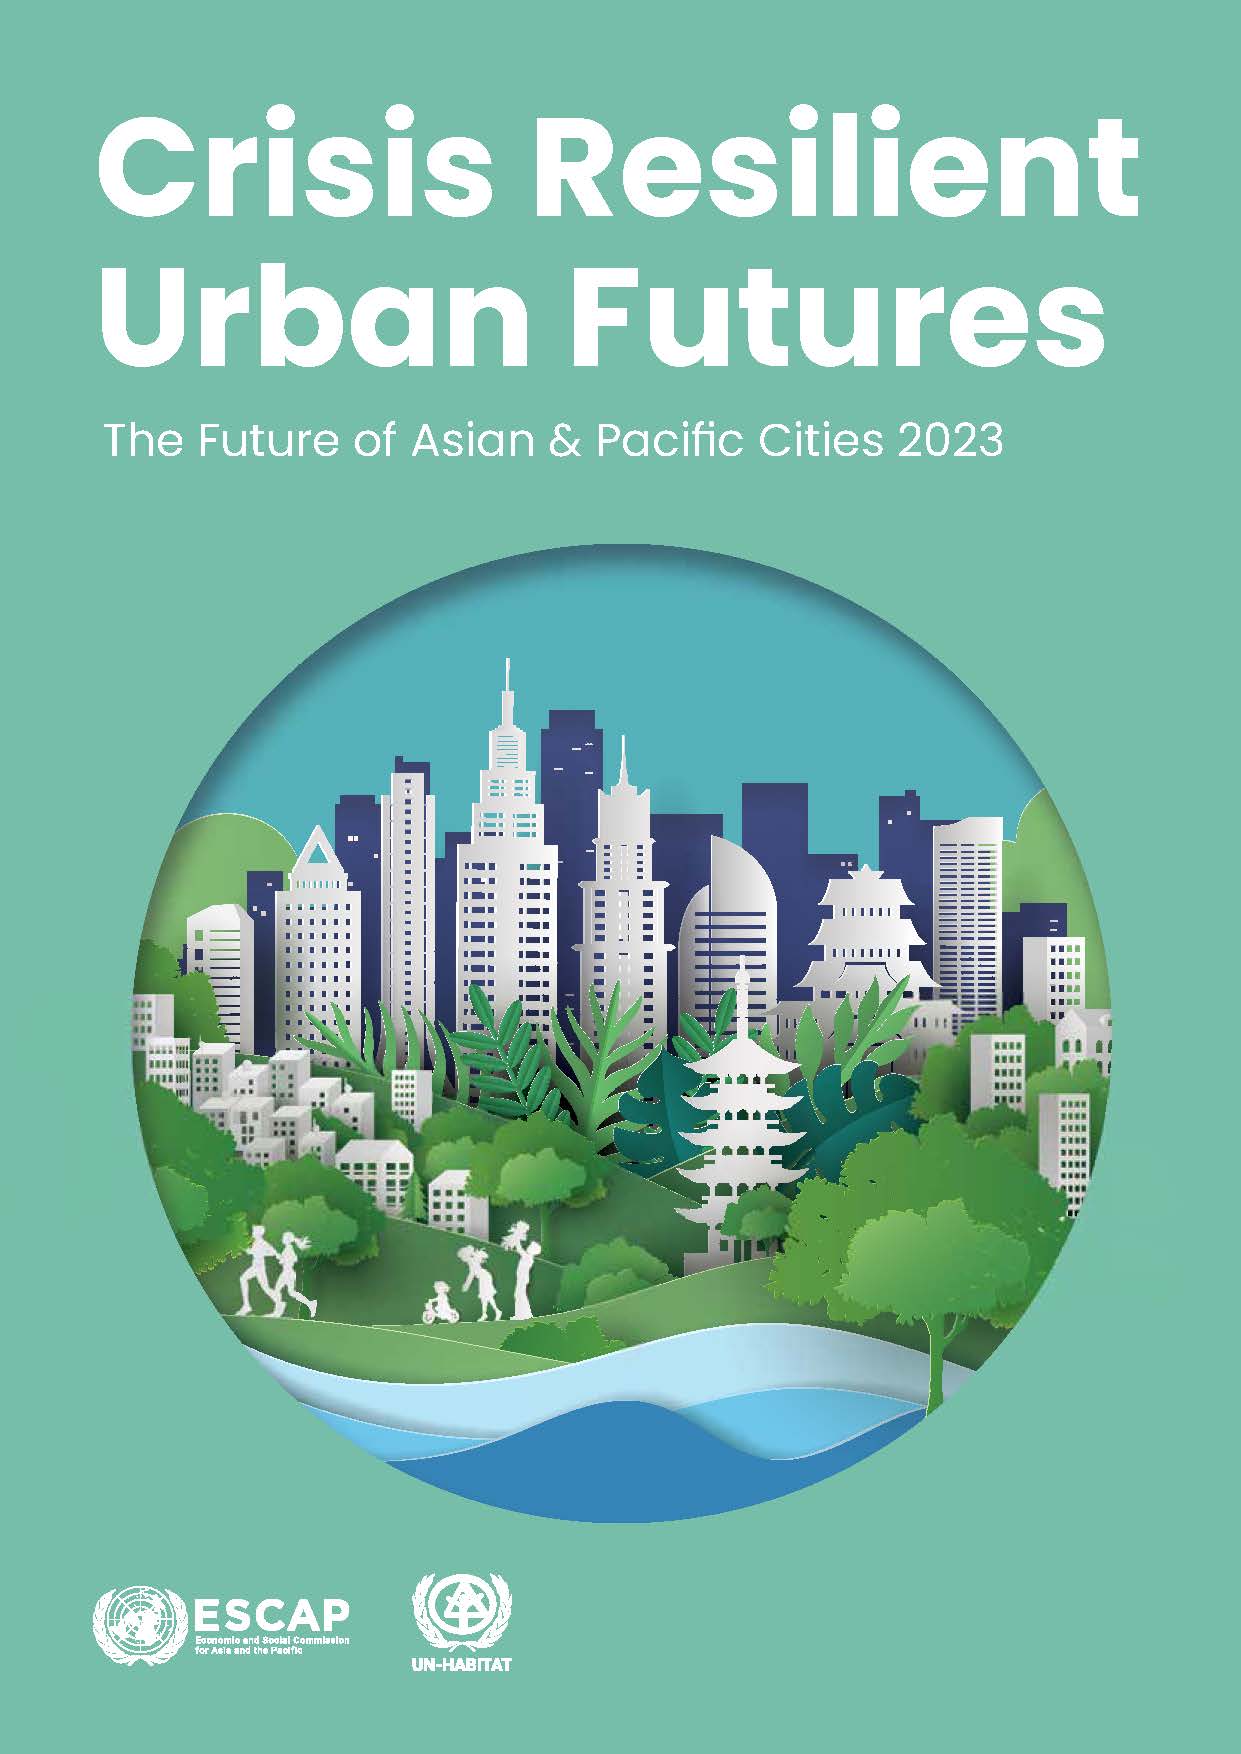 The future of Asian and pacific Cities 2023